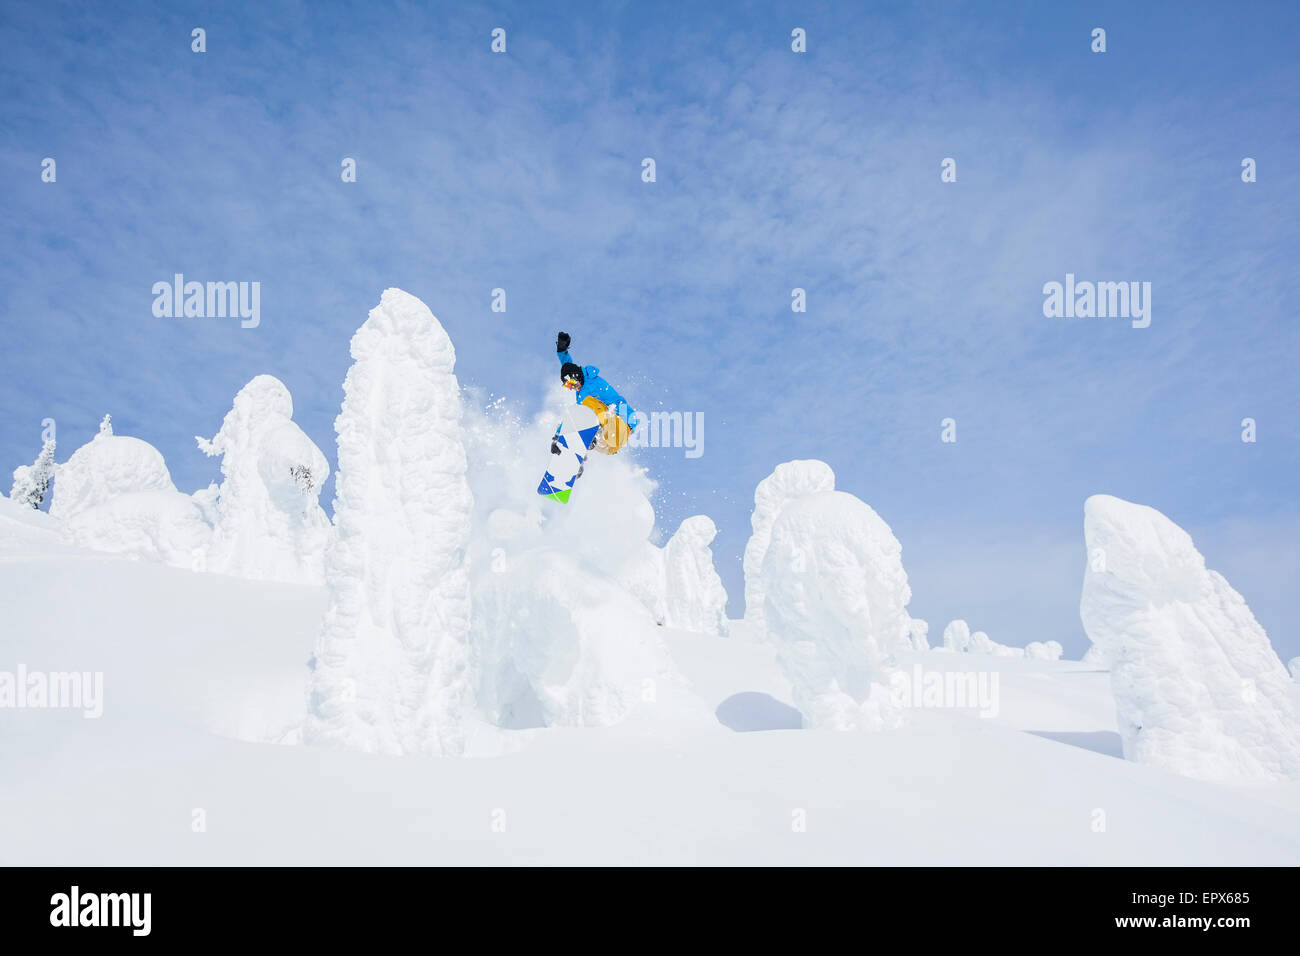 USA, Montana, Whitefish, Snowboarder jumping over snowy tree Stock Photo